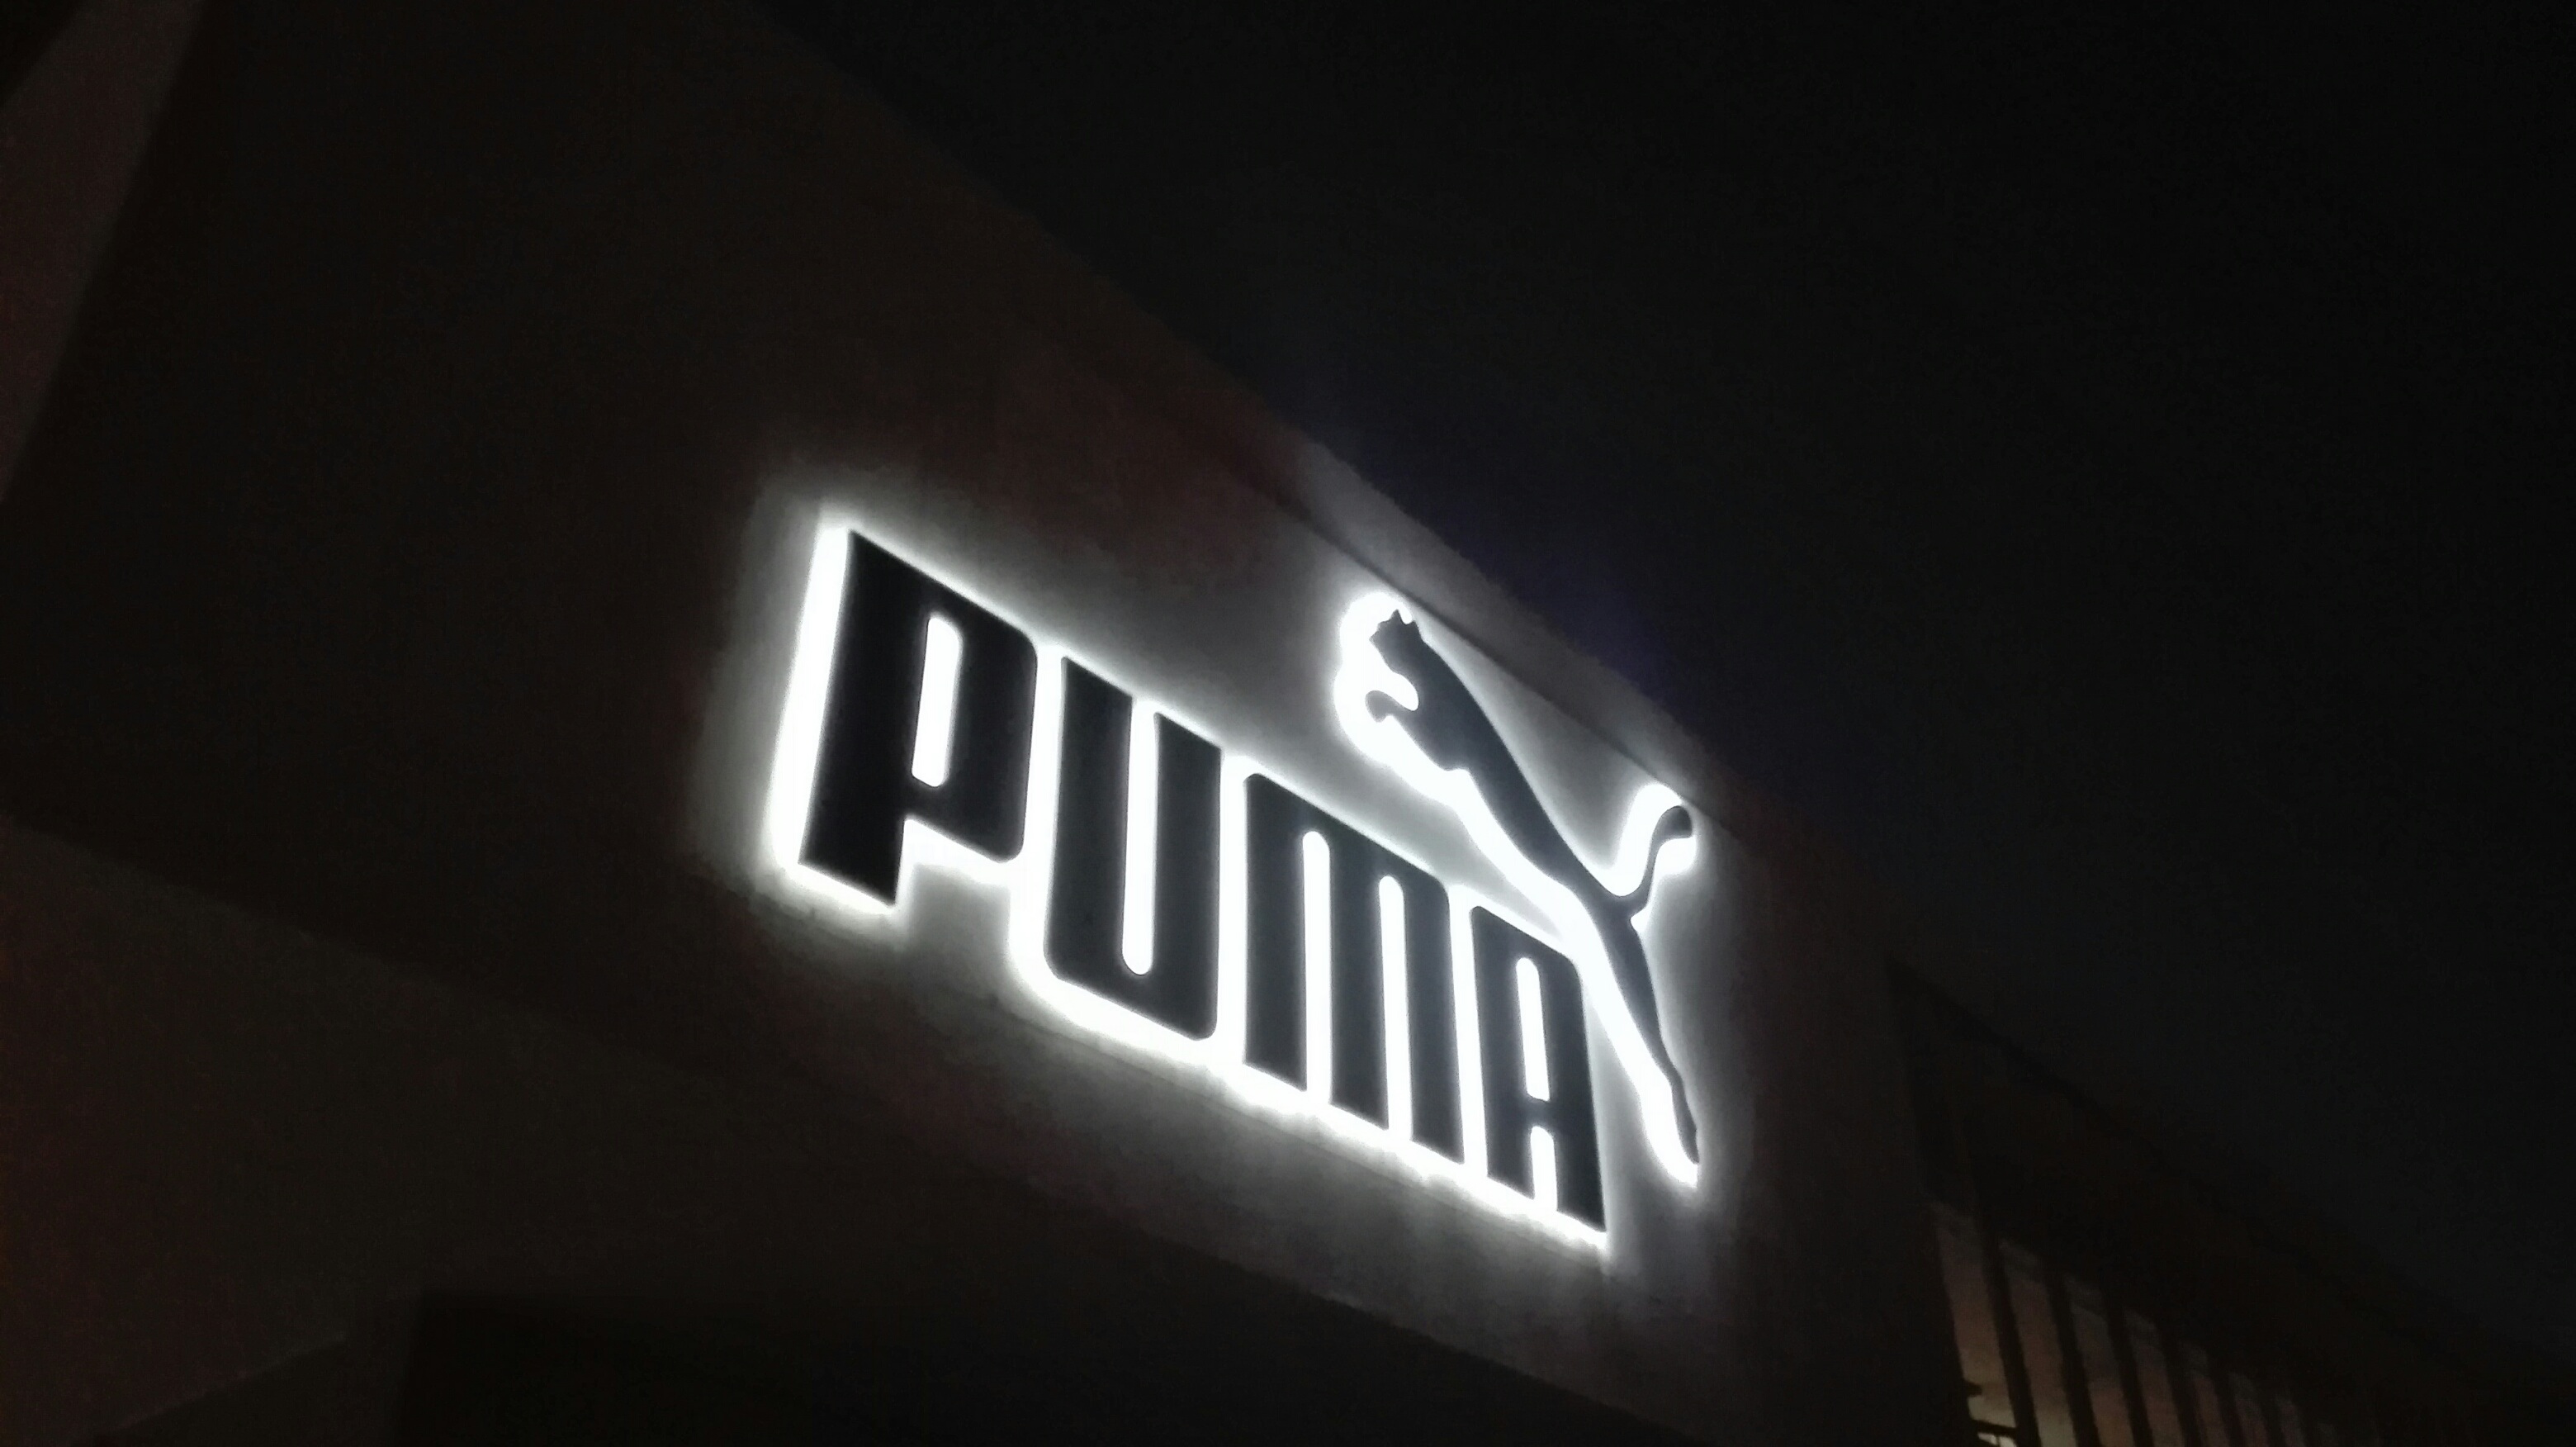 3D Fabricated with LEDs - Head Office Cape Town.    https://za.puma.com/